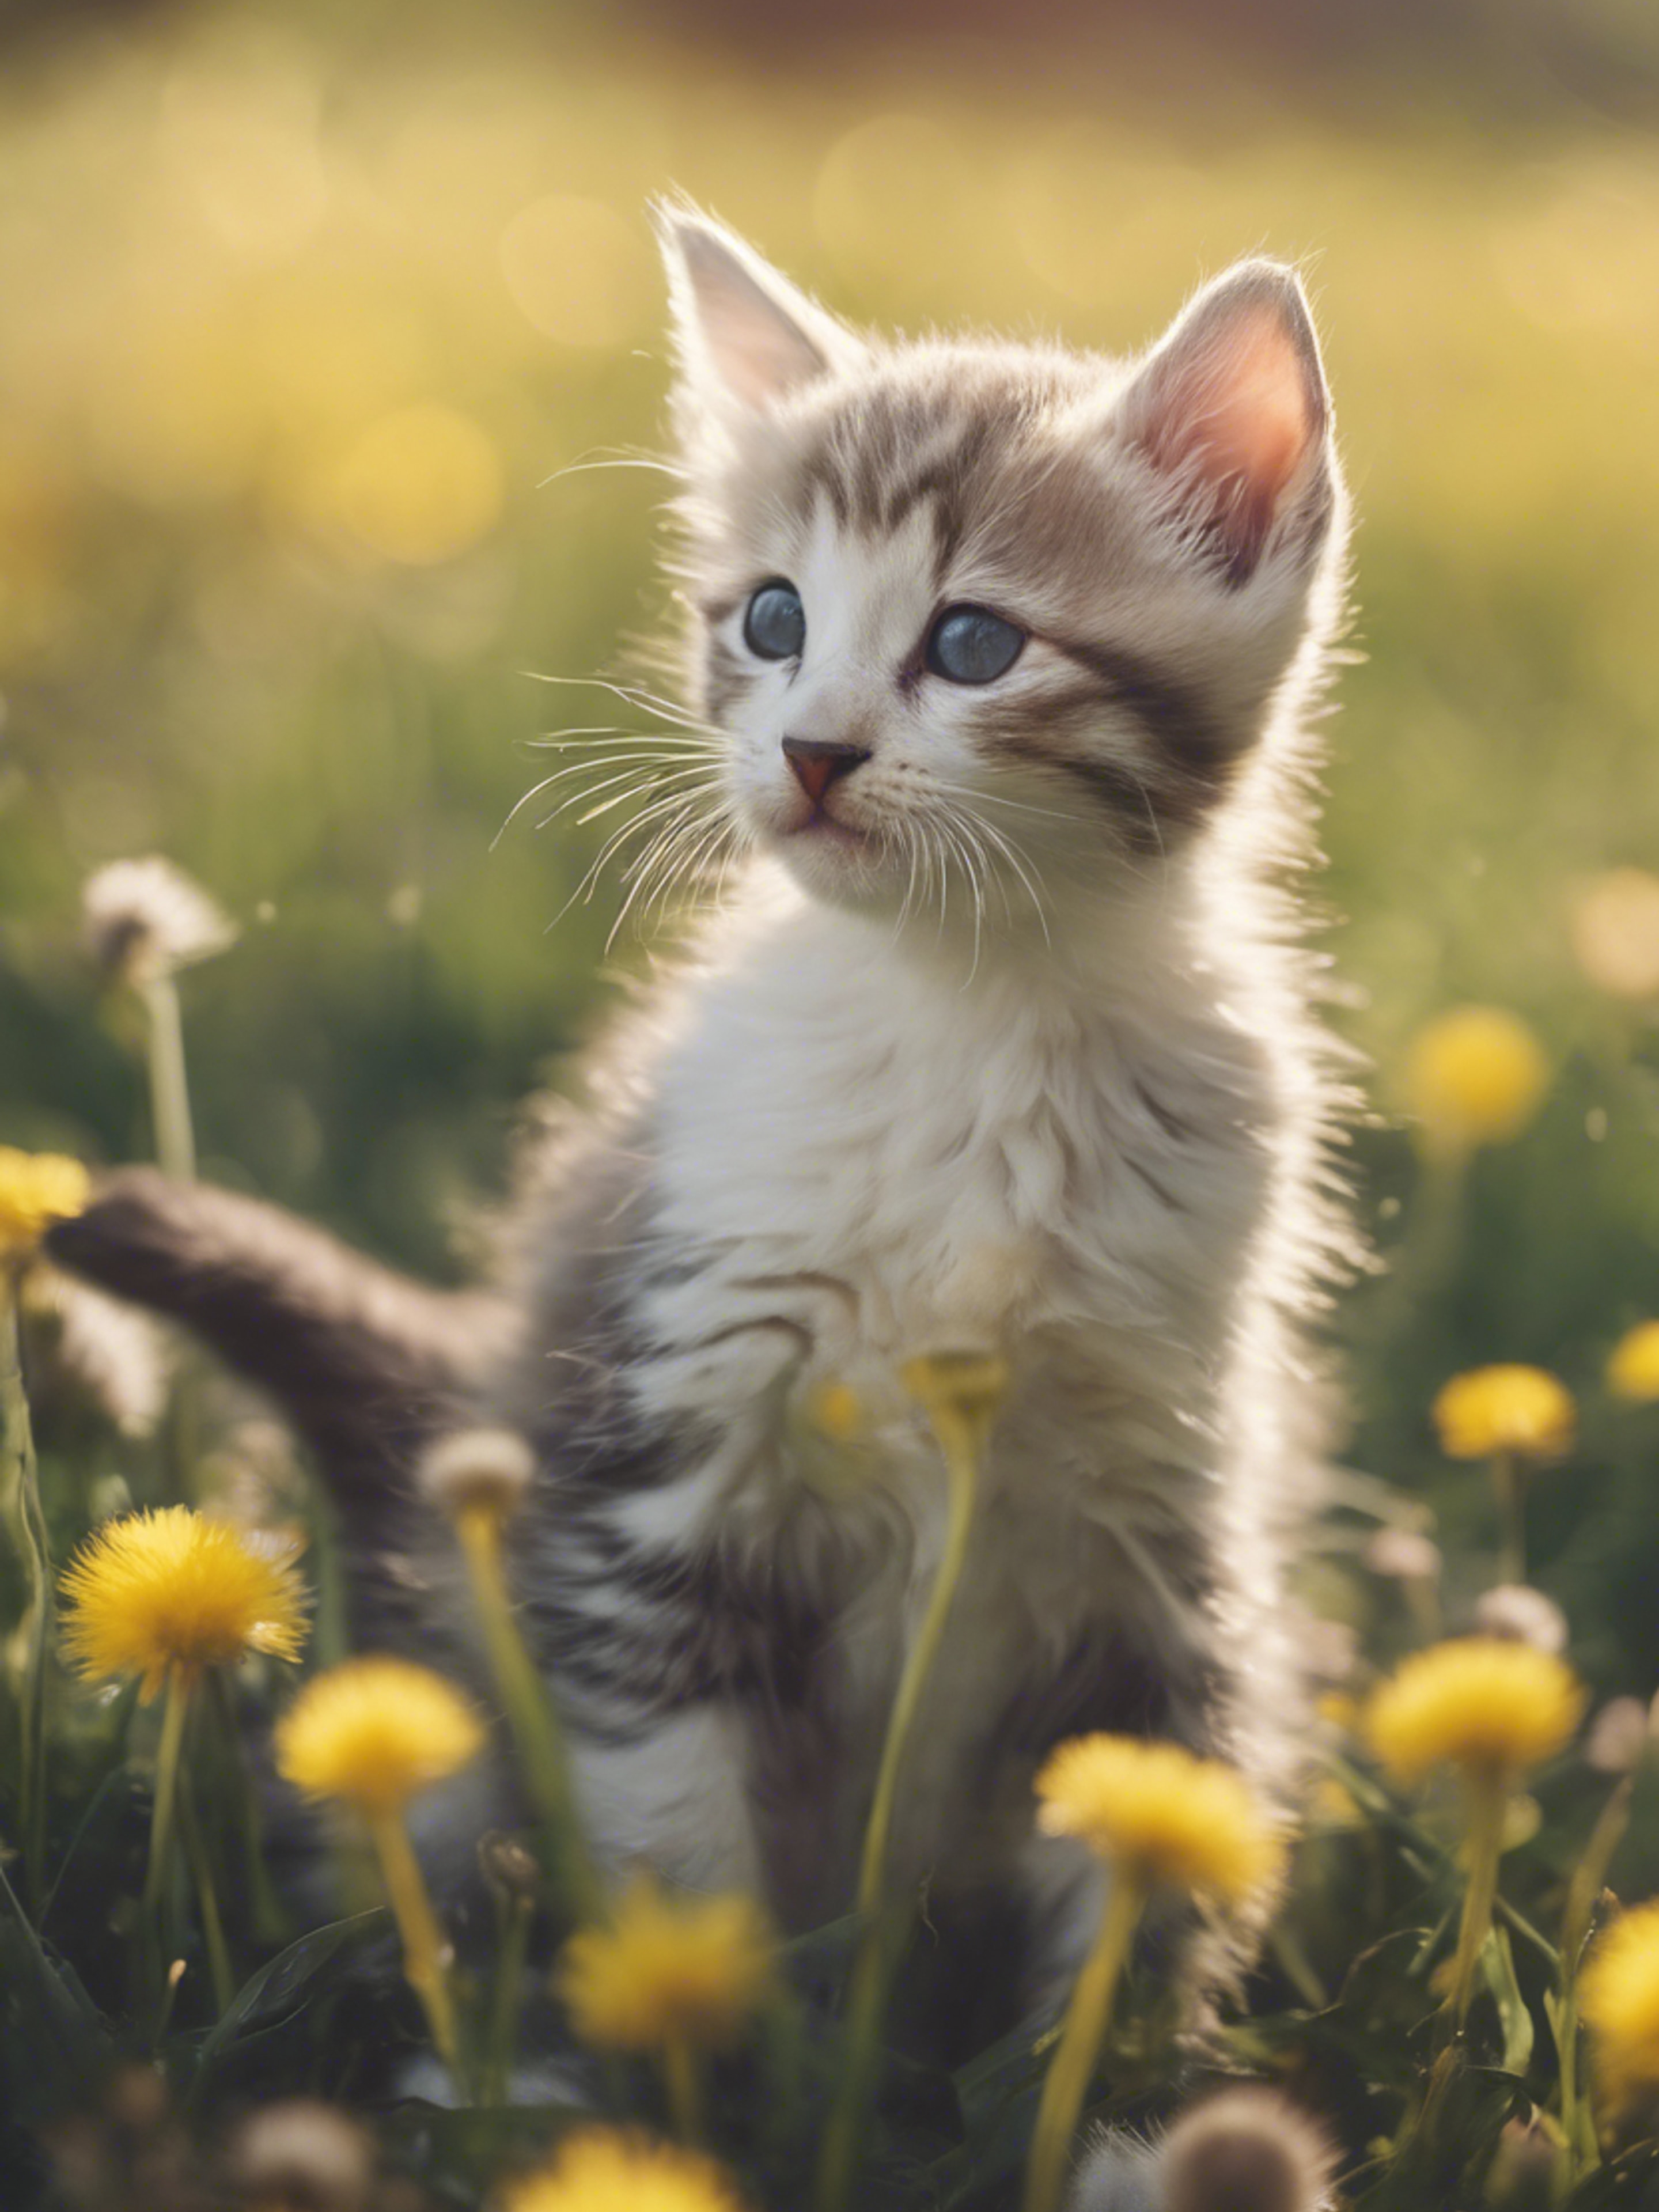 An adorable kitten playing in a field of dandelions.壁紙[3c336ebe7e974ecbade5]